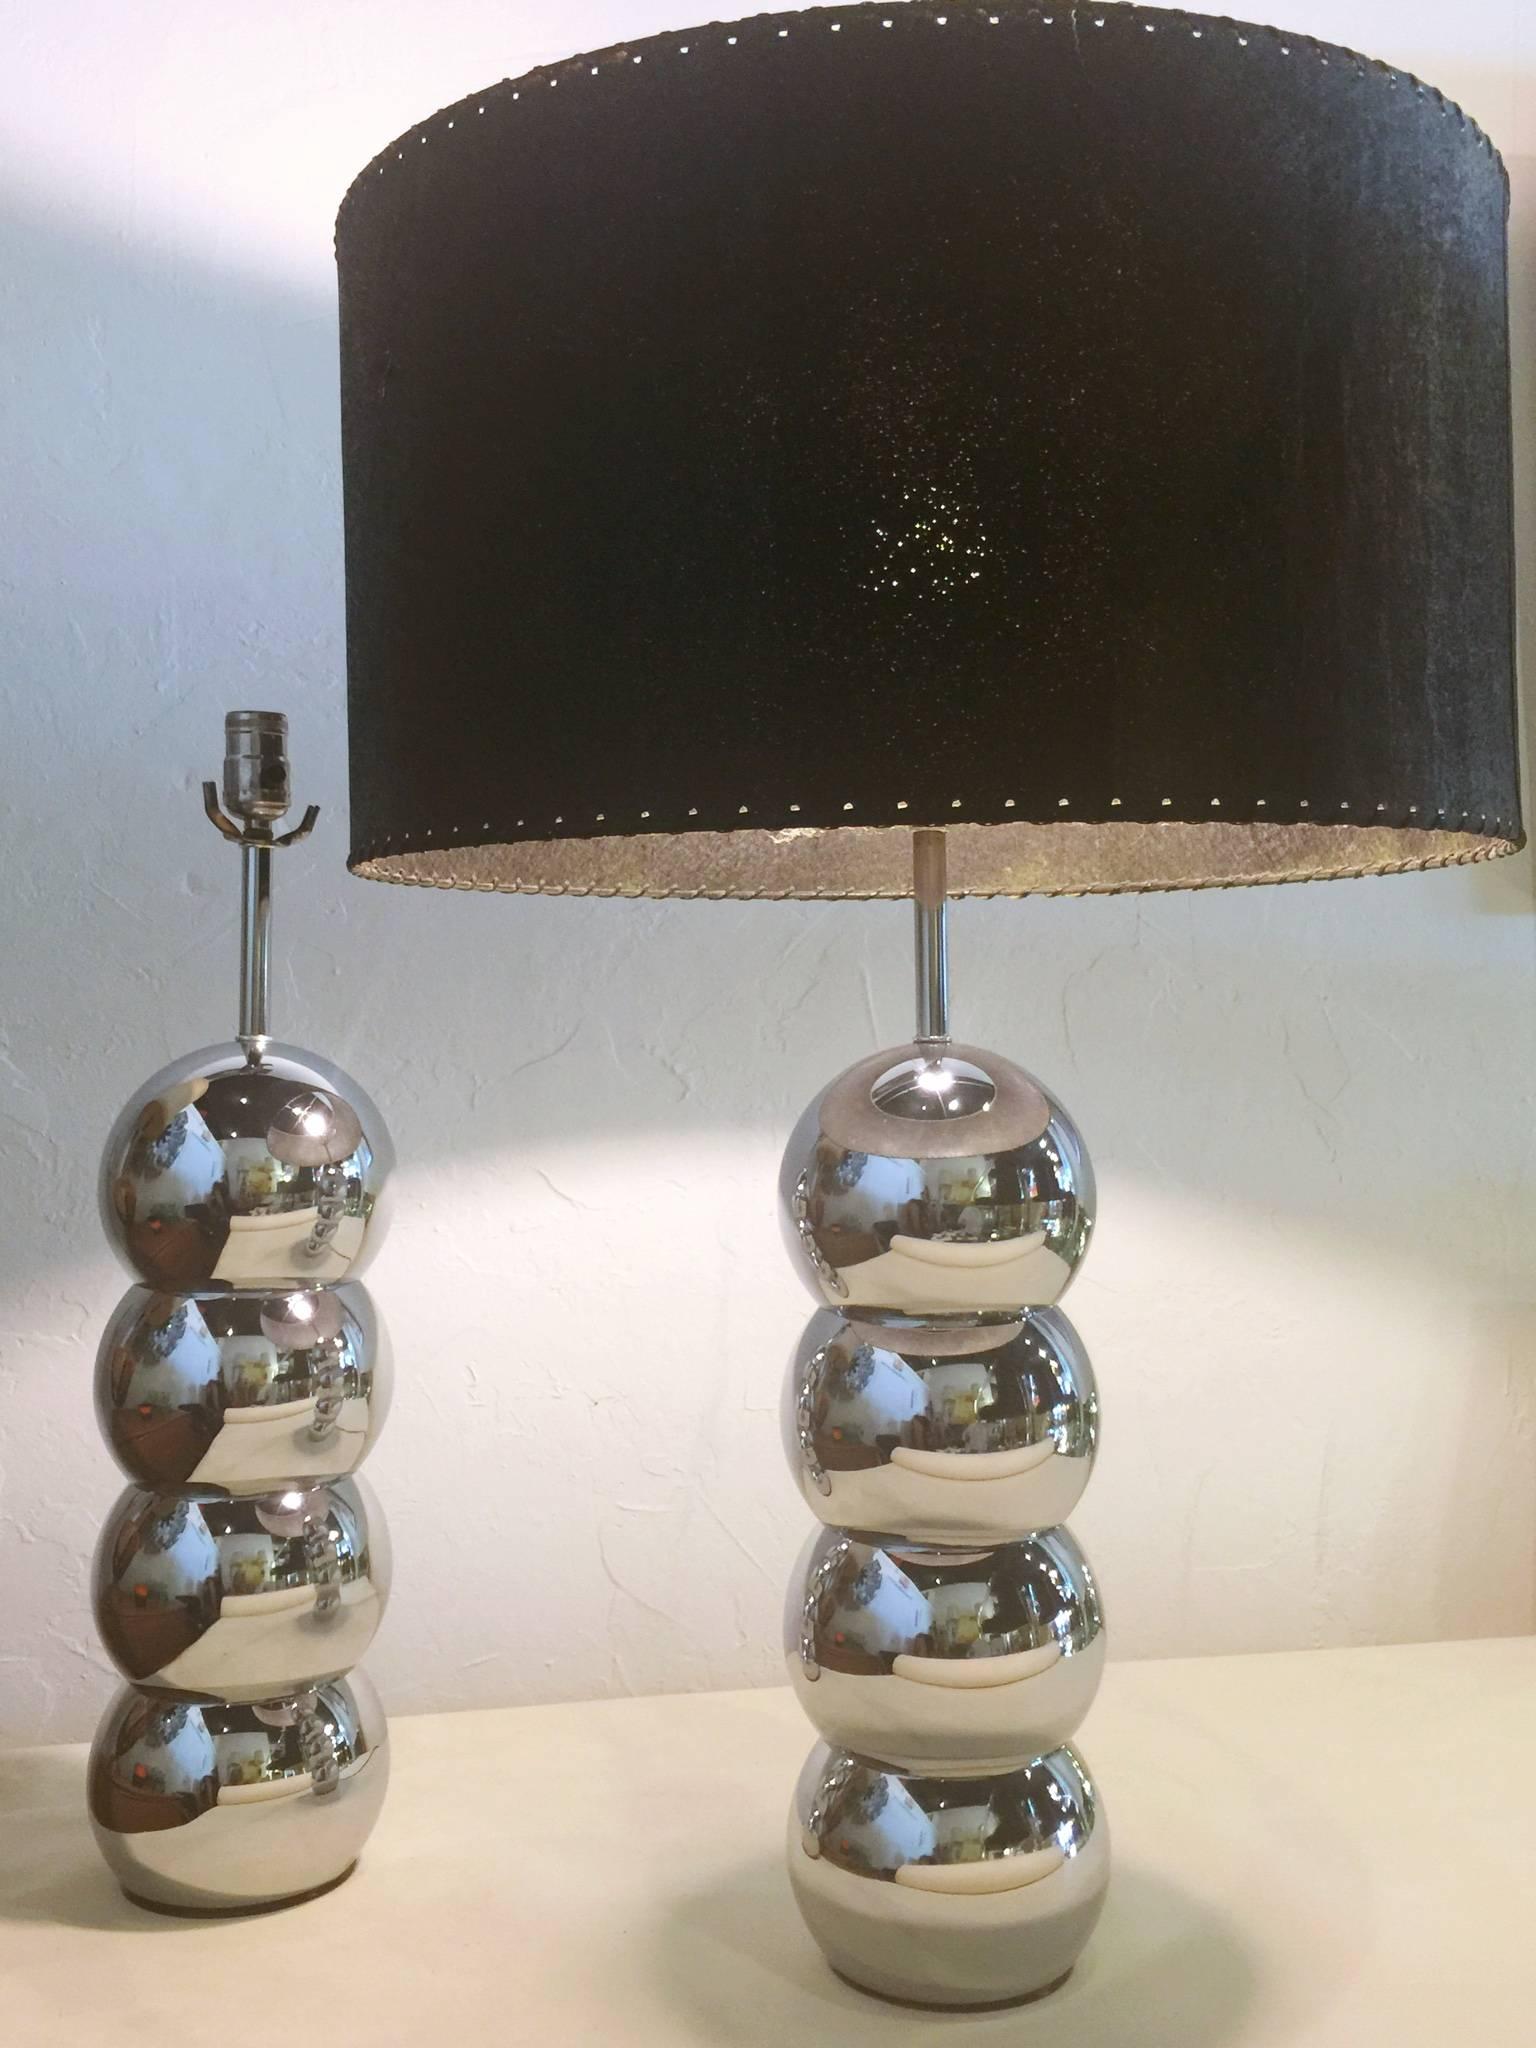 After so many years those modern lamps still shines brightly with style. Dress up with colorful shades or more classic ones this is a classic Mid-Century Modern 1970s George Kovacs chrome ball lamps that will easily fit any interior from your house